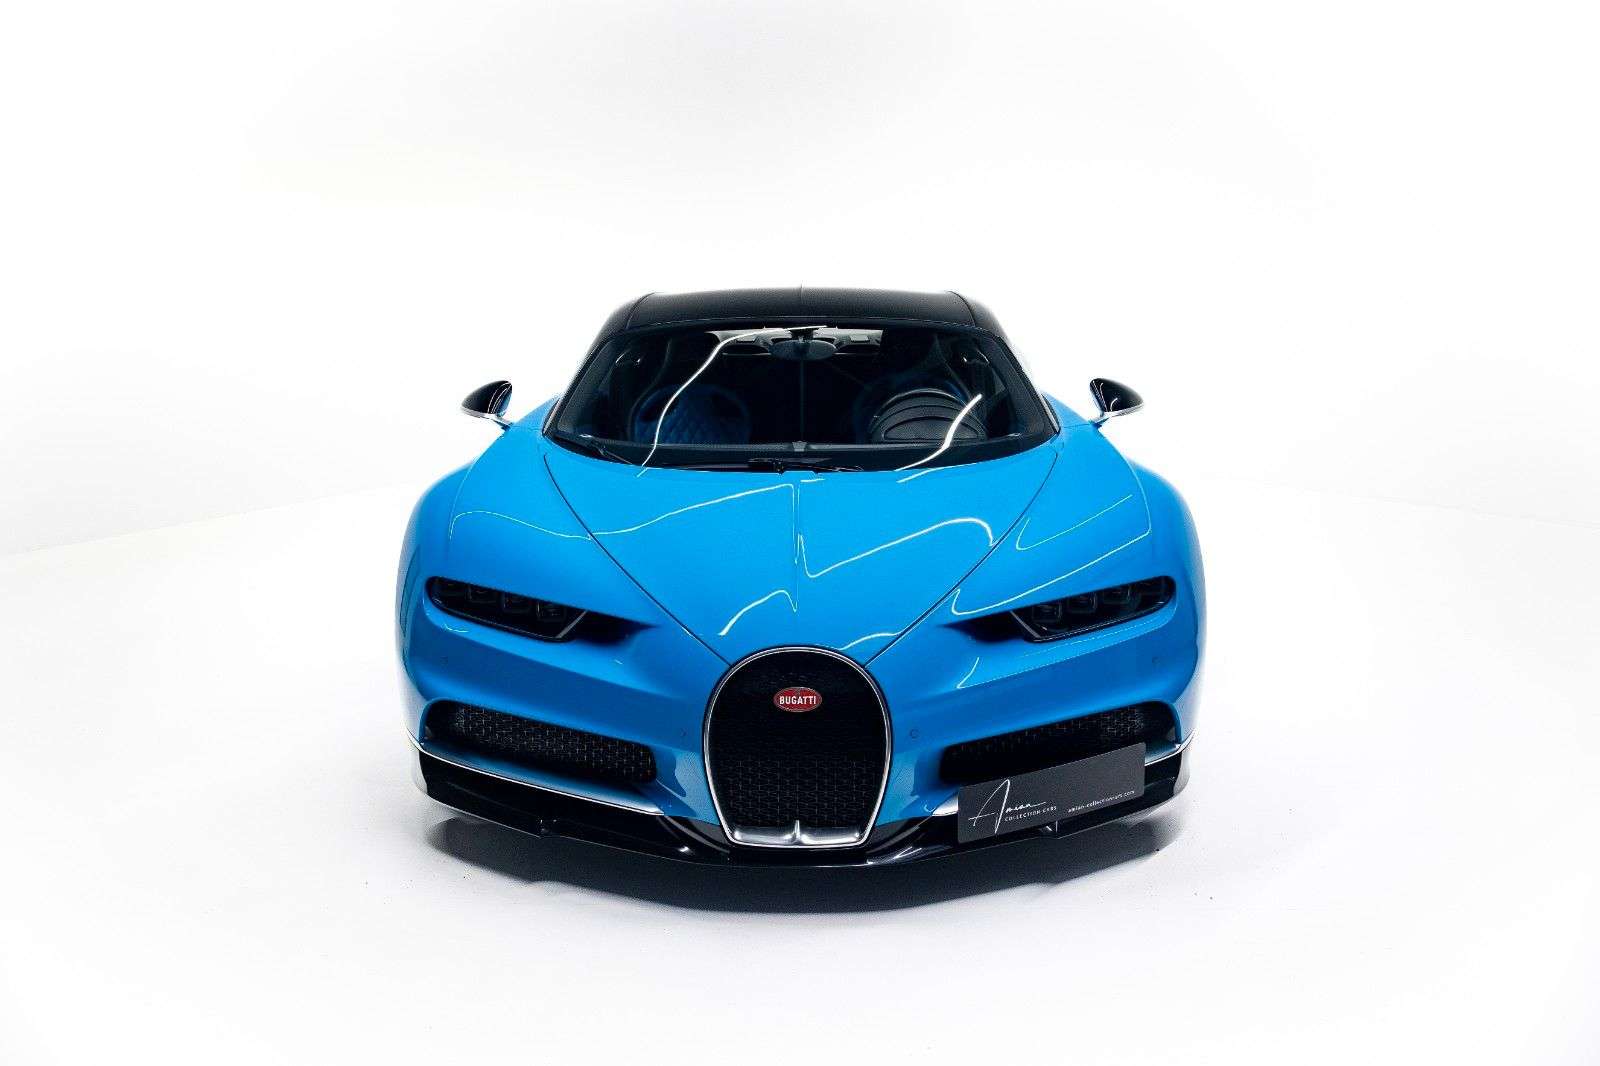 Bugatti Chiron Coupe in Blue used in Kerpen for € 3,600,000.-